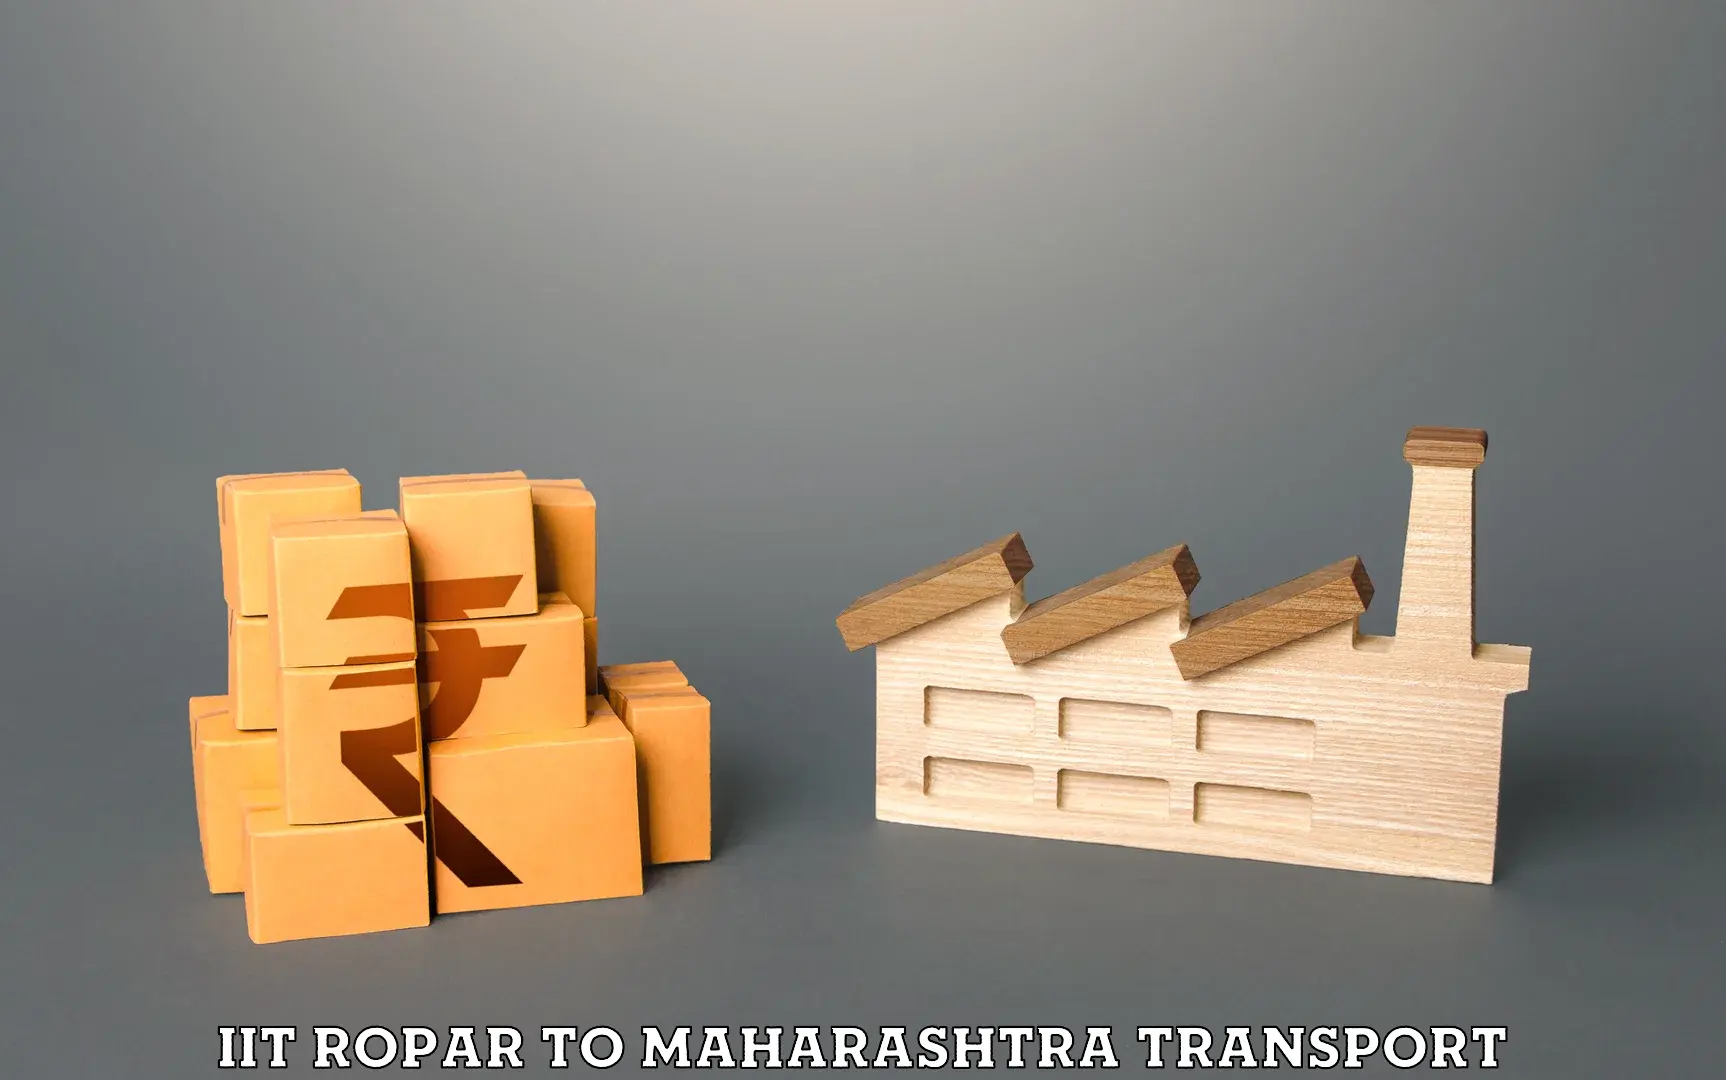 Commercial transport service IIT Ropar to Khed